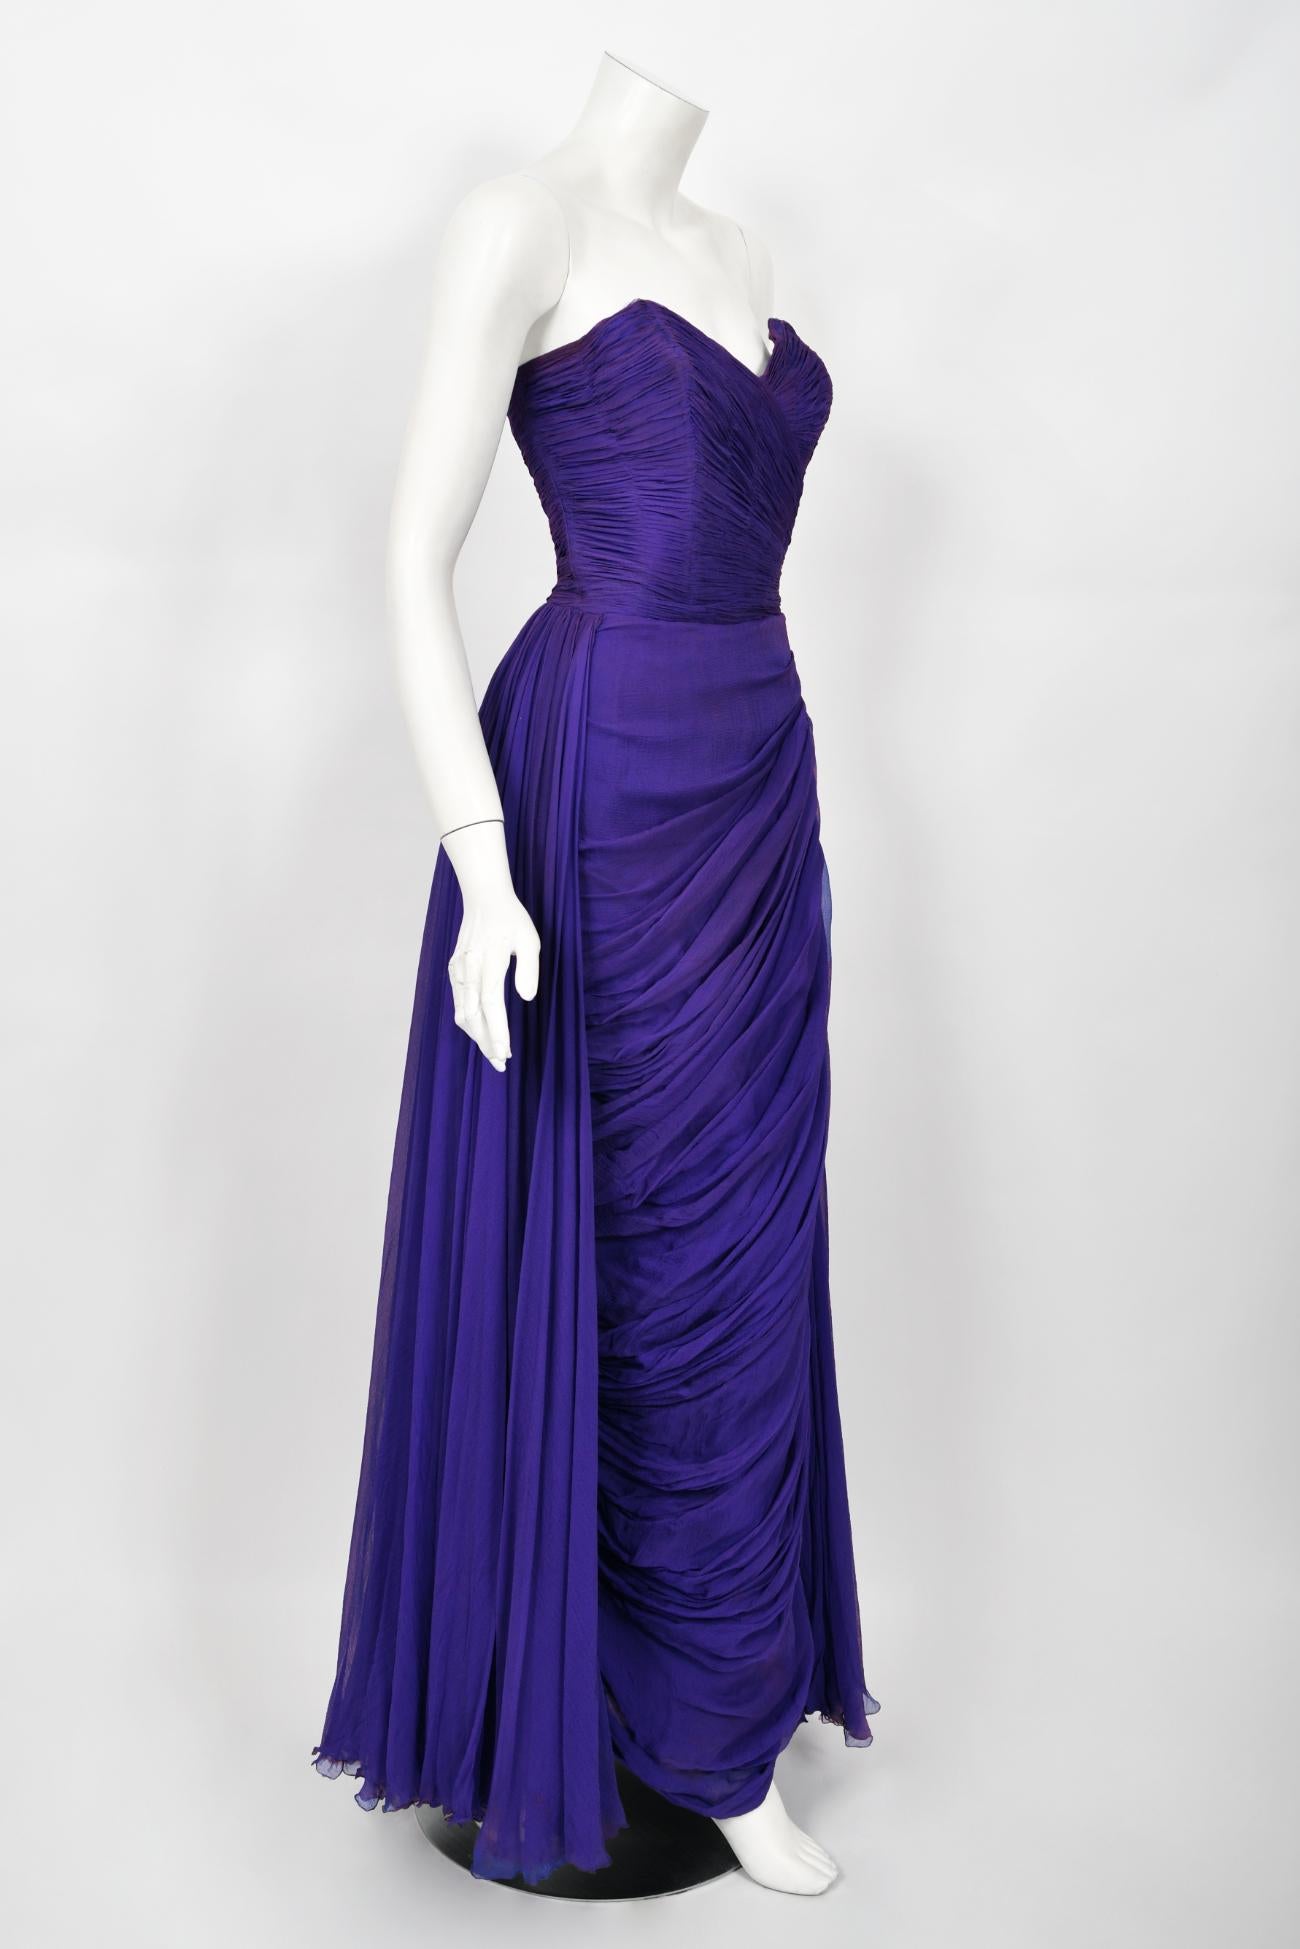 Vintage 1950s Curiel Couture Pleated Purple Silk Chiffon Strapless Goddess Gown  For Sale 2